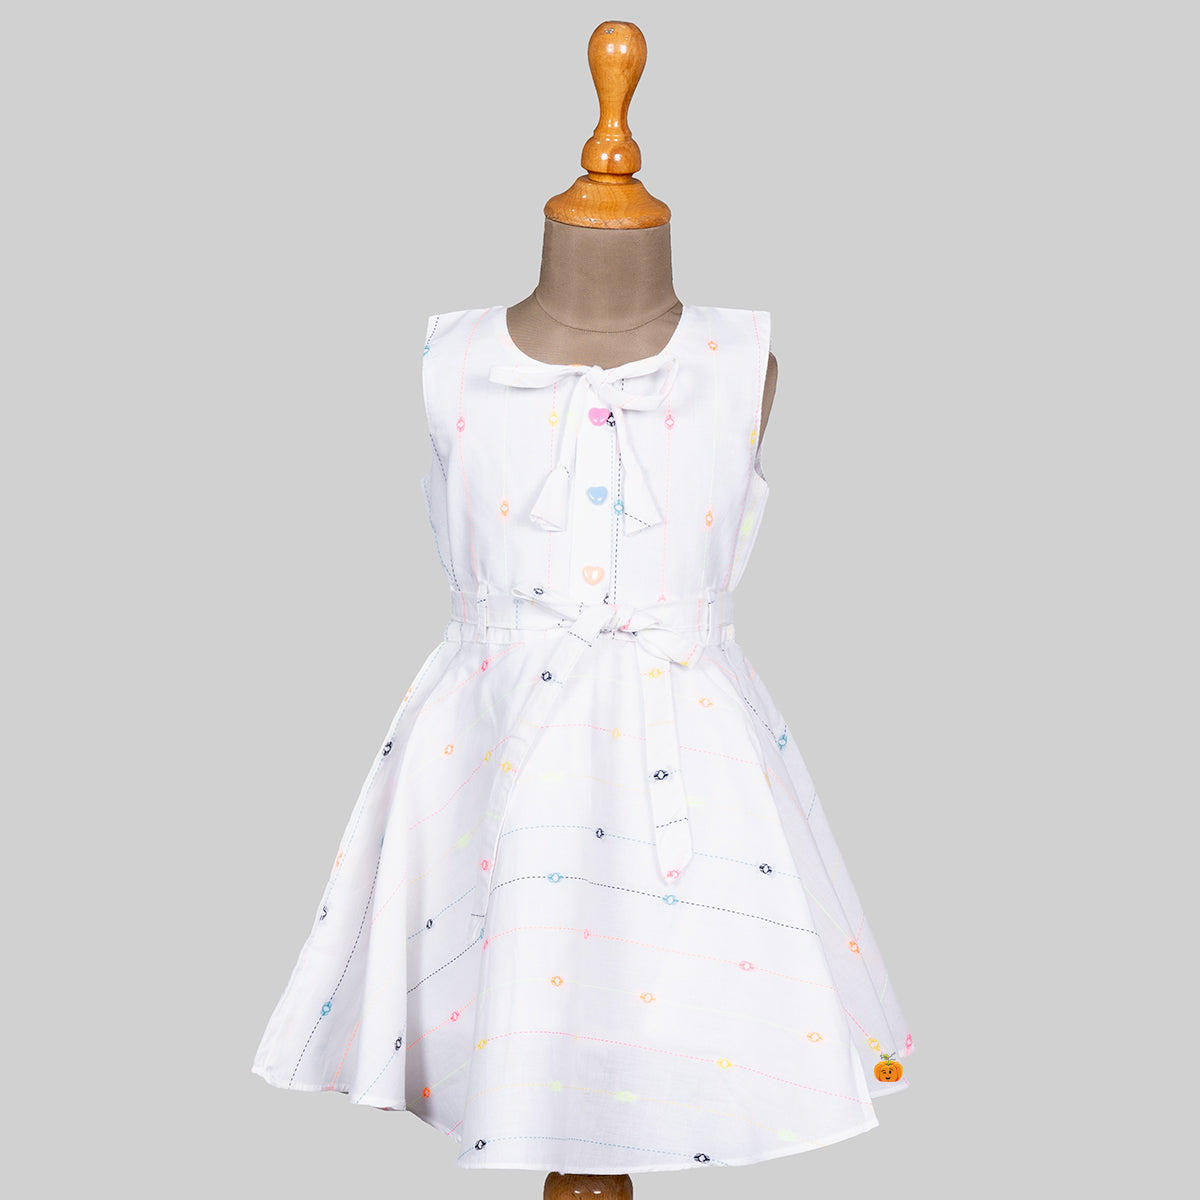 Buy online Girls Printed Cotton Frock from girls for Women by Vmart for  225 at 0 off  2023 Limeroadcom